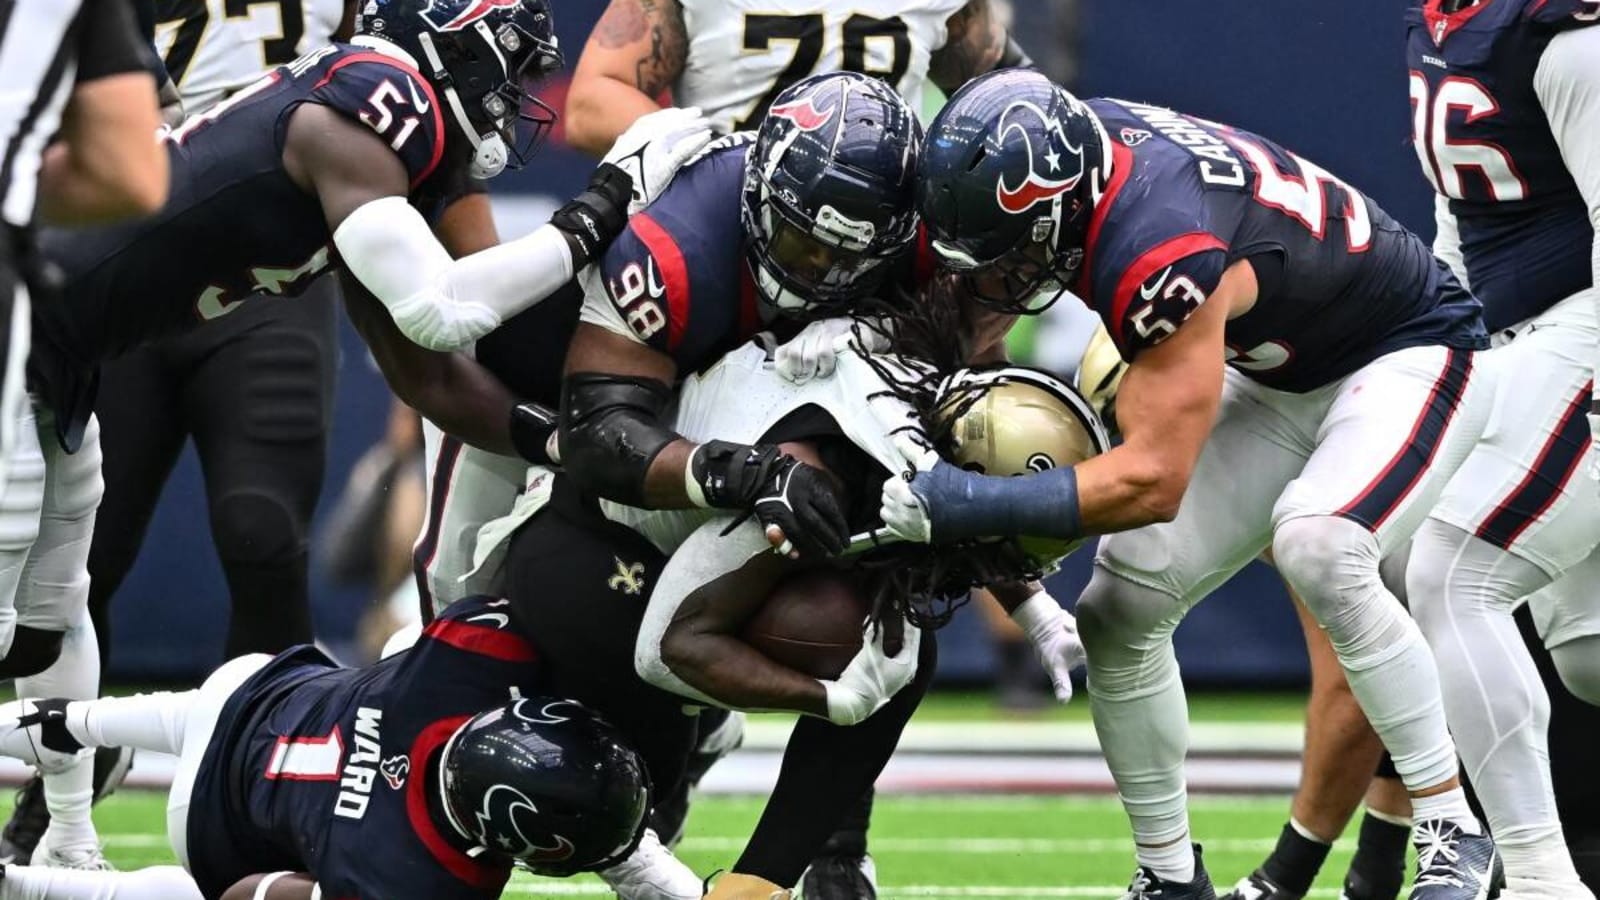 Nick Caserio Details Work Remaining For Texans Following Hot Start